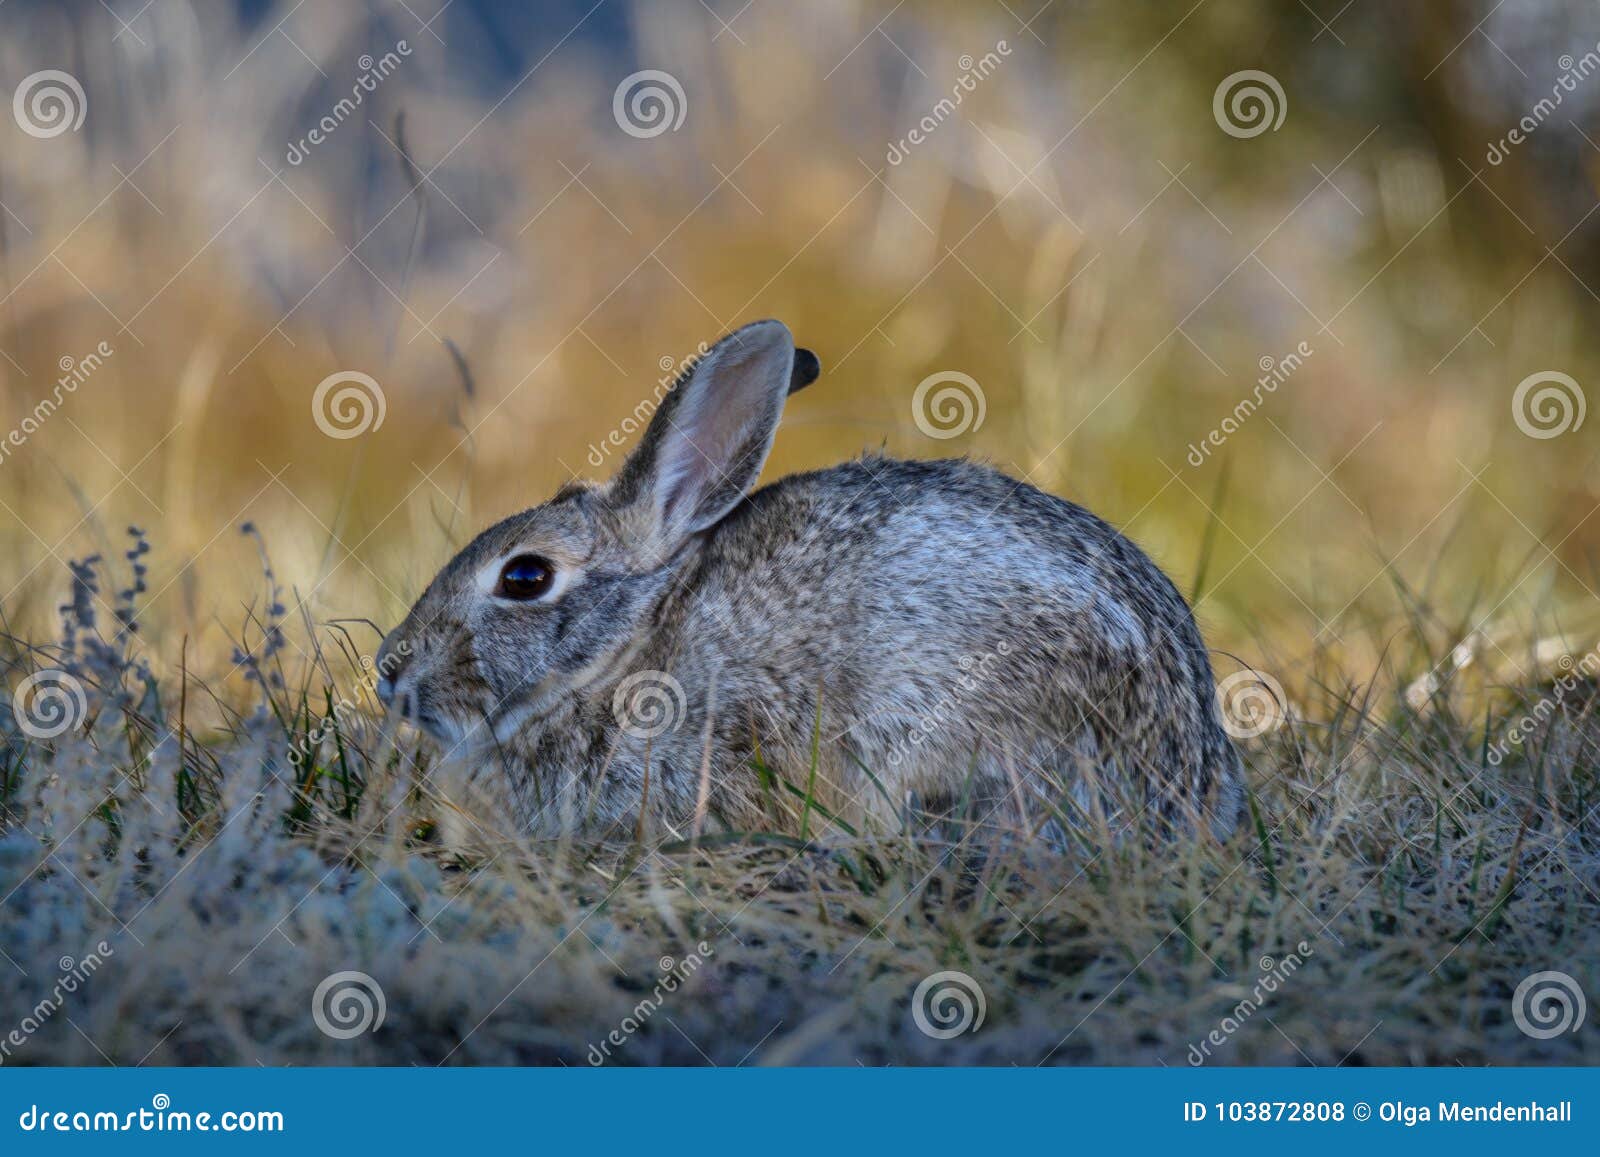 closeup of a wild cottontail bunny rabbit in the field, meadow. early morning.